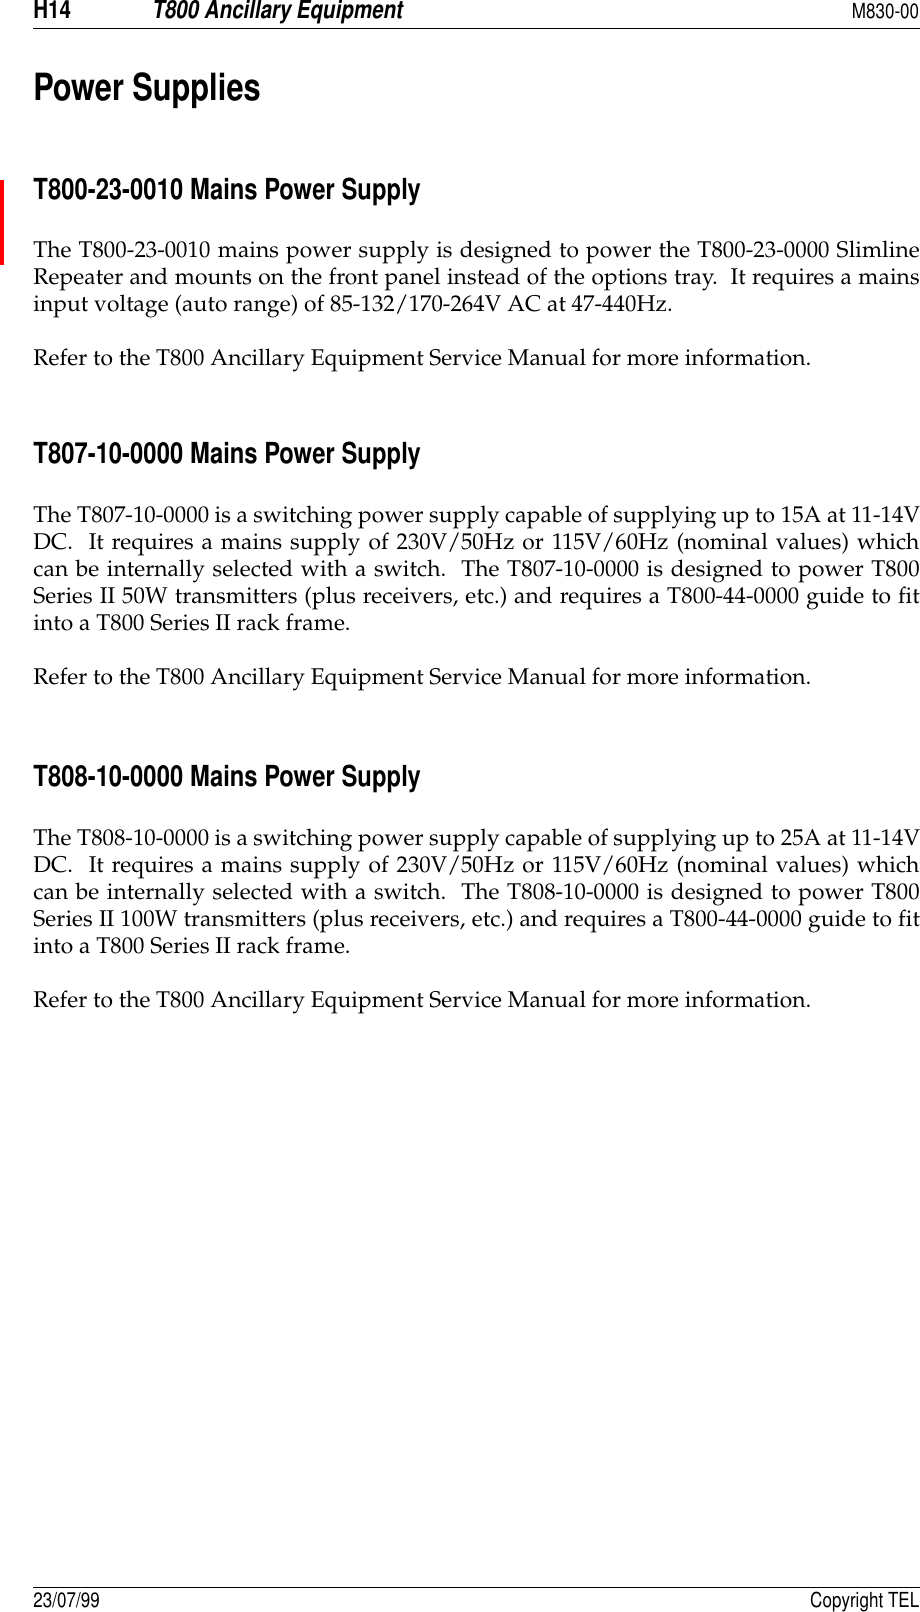 H14T800 Ancillary EquipmentM830-0023/07/99 Copyright TELPower SuppliesT800-23-0010 Mains Power SupplyThe T800-23-0010 mains power supply is designed to power the T800-23-0000 SlimlineRepeater and mounts on the front panel instead of the options tray.  It requires a mainsinput voltage (auto range) of 85-132/170-264V AC at 47-440Hz.Refer to the T800 Ancillary Equipment Service Manual for more information.T807-10-0000 Mains Power SupplyThe T807-10-0000 is a switching power supply capable of supplying up to 15A at 11-14VDC.  It requires a mains supply of 230V/50Hz or 115V/60Hz (nominal values) whichcan be internally selected with a switch.  The T807-10-0000 is designed to power T800Series II 50W transmitters (plus receivers, etc.) and requires a T800-44-0000 guide to fitinto a T800 Series II rack frame.Refer to the T800 Ancillary Equipment Service Manual for more information.T808-10-0000 Mains Power SupplyThe T808-10-0000 is a switching power supply capable of supplying up to 25A at 11-14VDC.  It requires a mains supply of 230V/50Hz or 115V/60Hz (nominal values) whichcan be internally selected with a switch.  The T808-10-0000 is designed to power T800Series II 100W transmitters (plus receivers, etc.) and requires a T800-44-0000 guide to fitinto a T800 Series II rack frame.Refer to the T800 Ancillary Equipment Service Manual for more information.